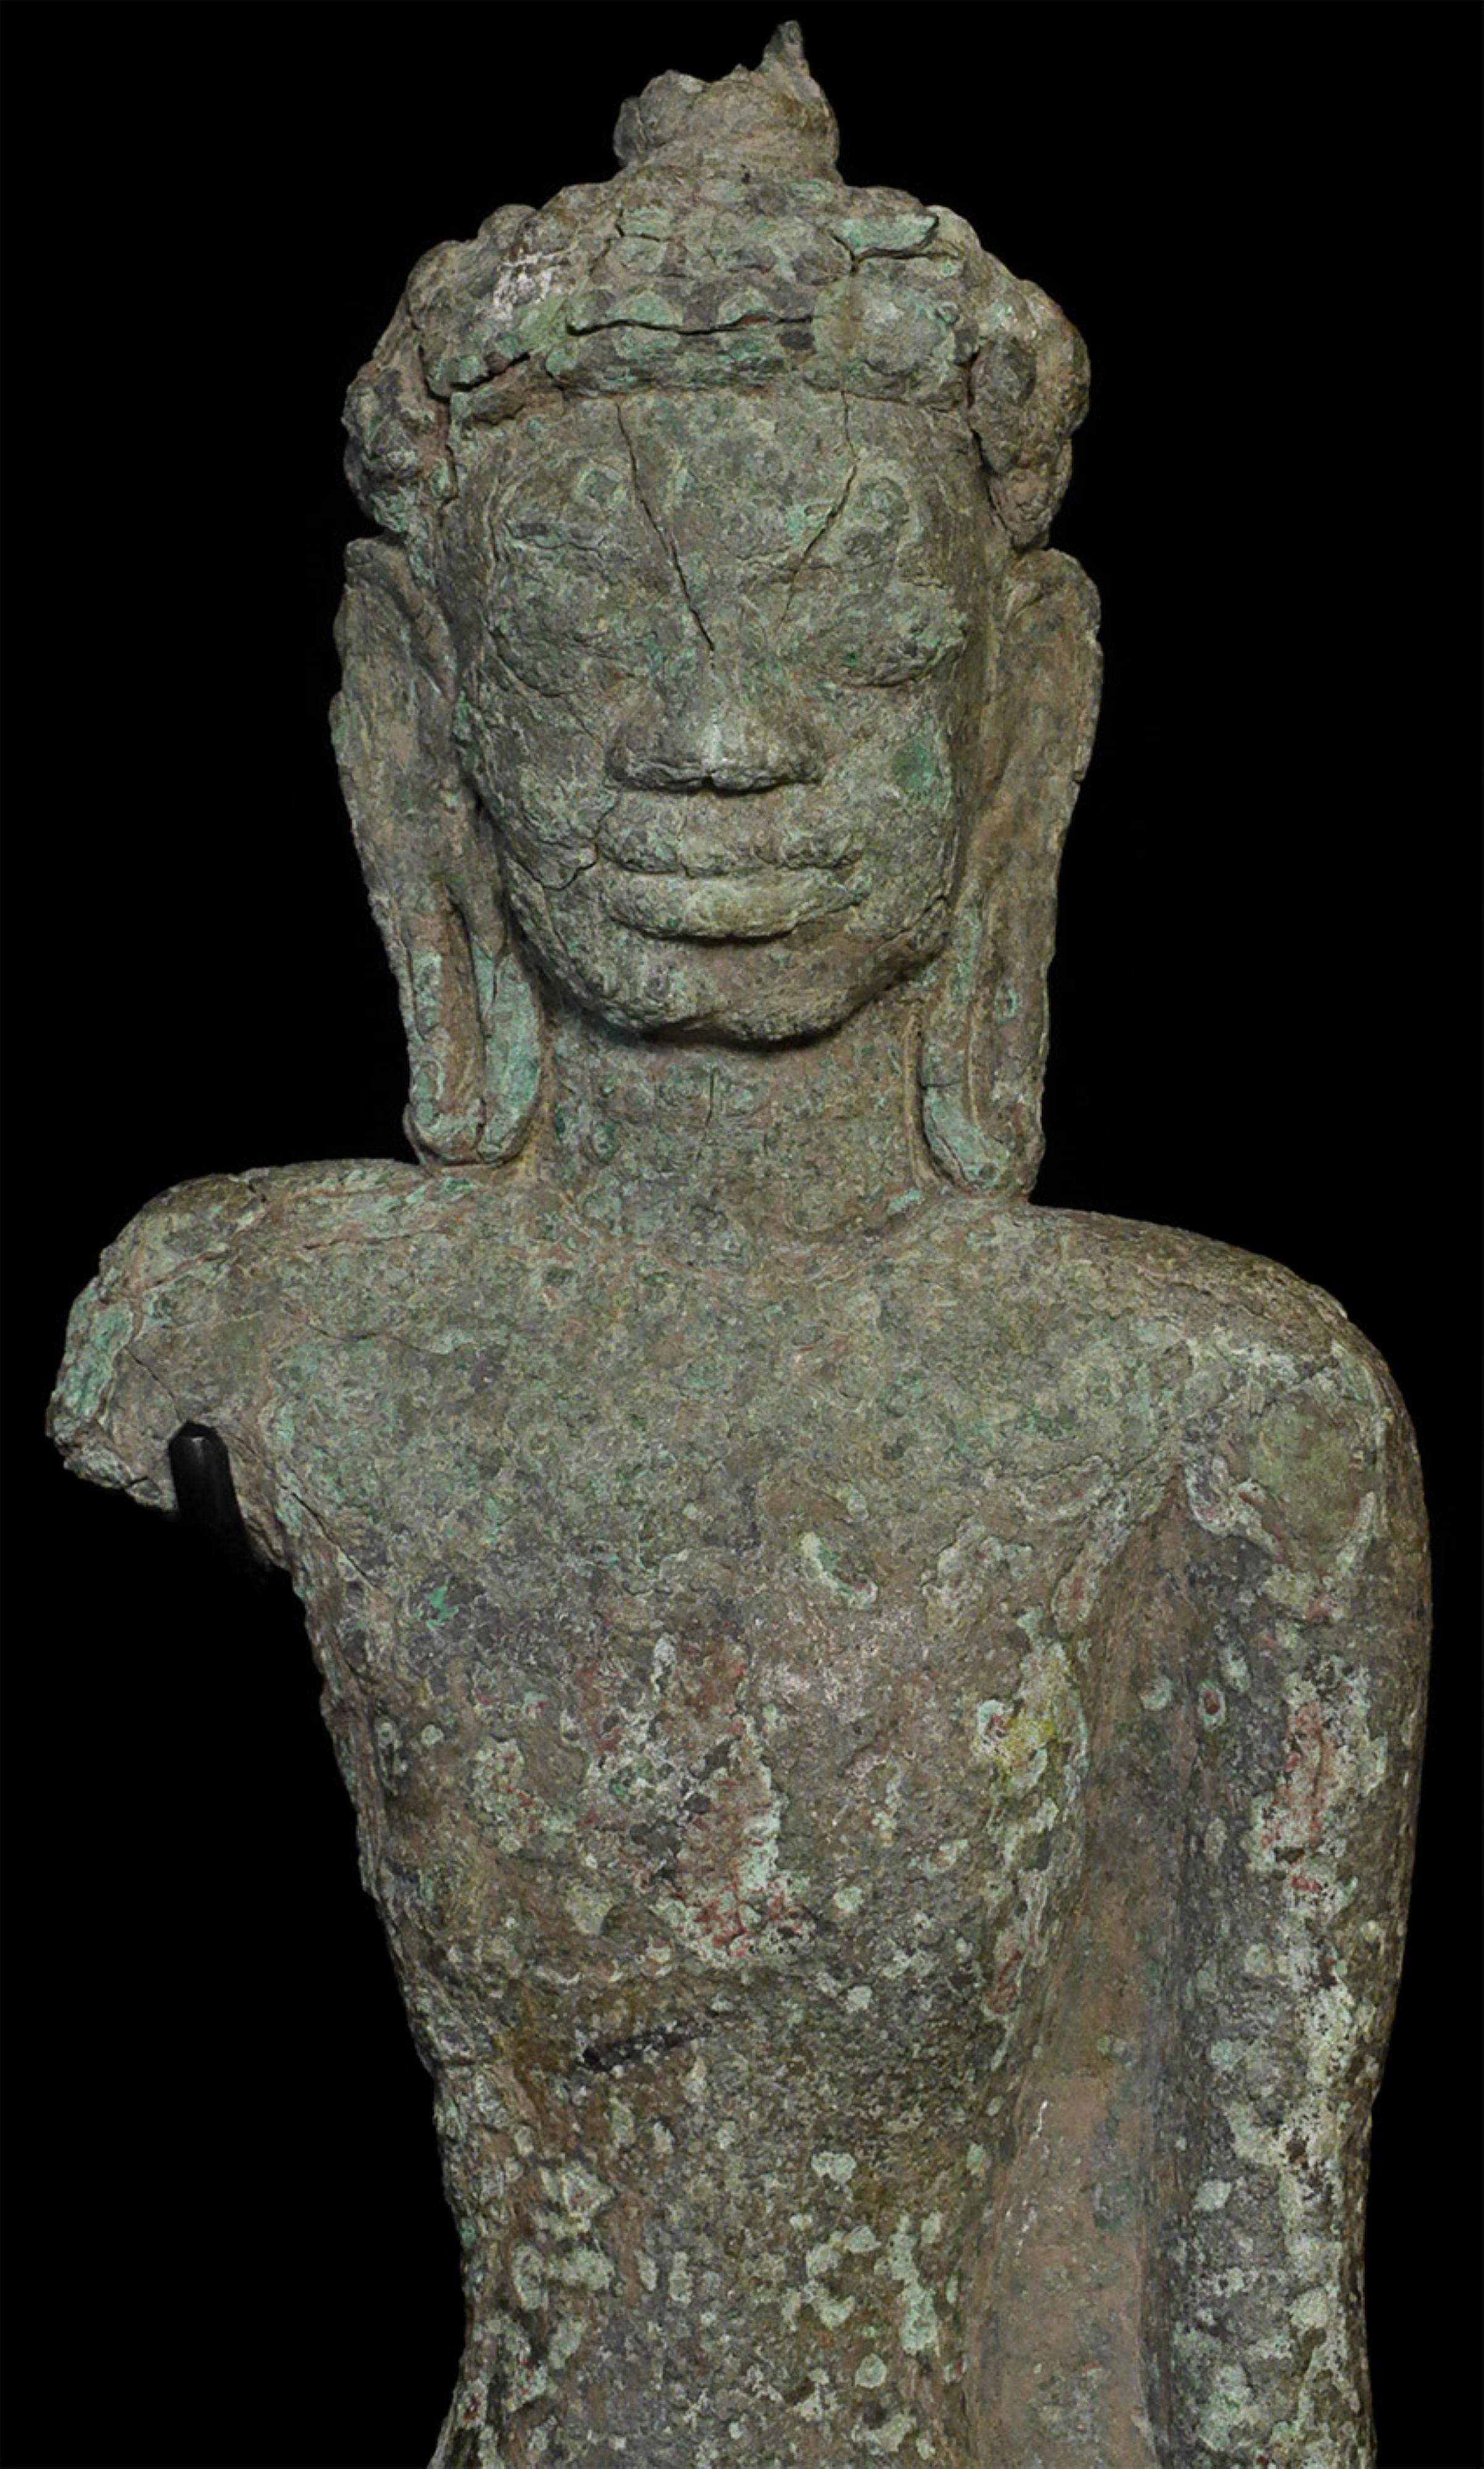 Very early SE Asian Mon Buddha--probably 6thC. Extremely rare to find in such a large size (the full figure would have stood a good 18+ inches tall, which was enormous for this very early period). Wonderfully expressive face. Strong burial patina.